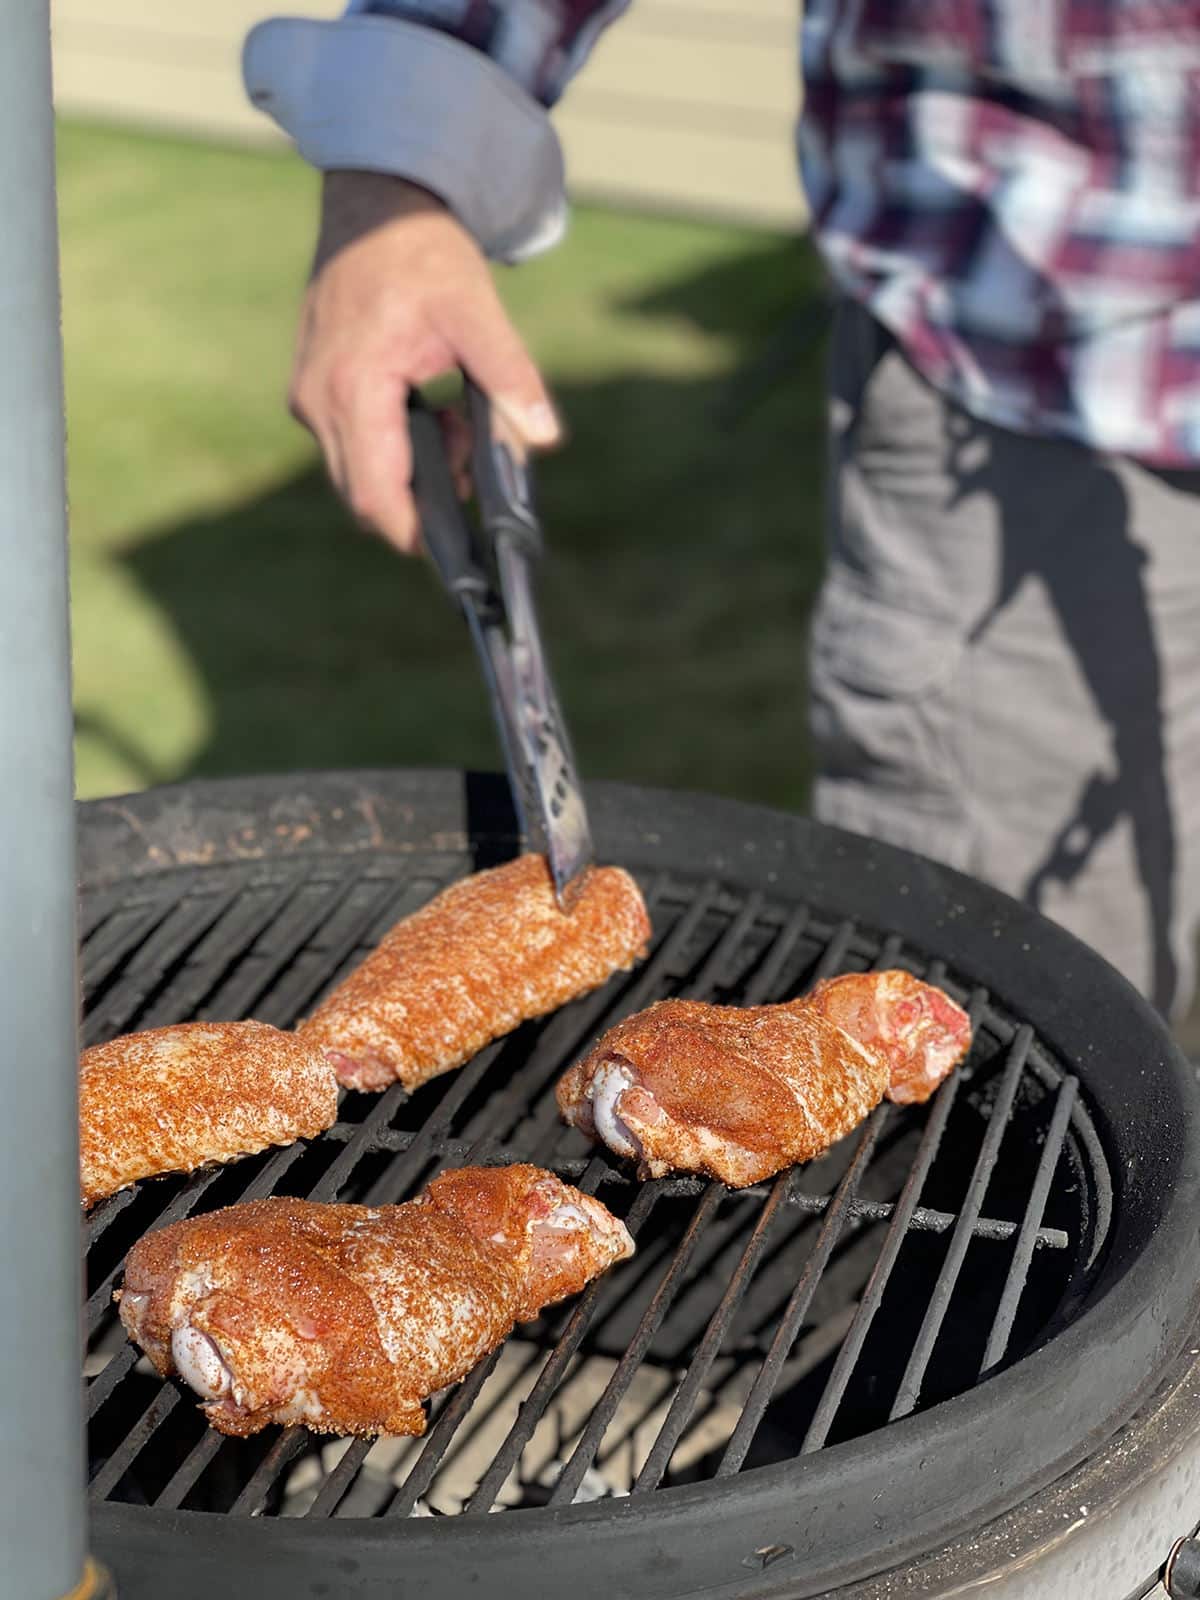 Hang holding tongs putting wings on a grill.